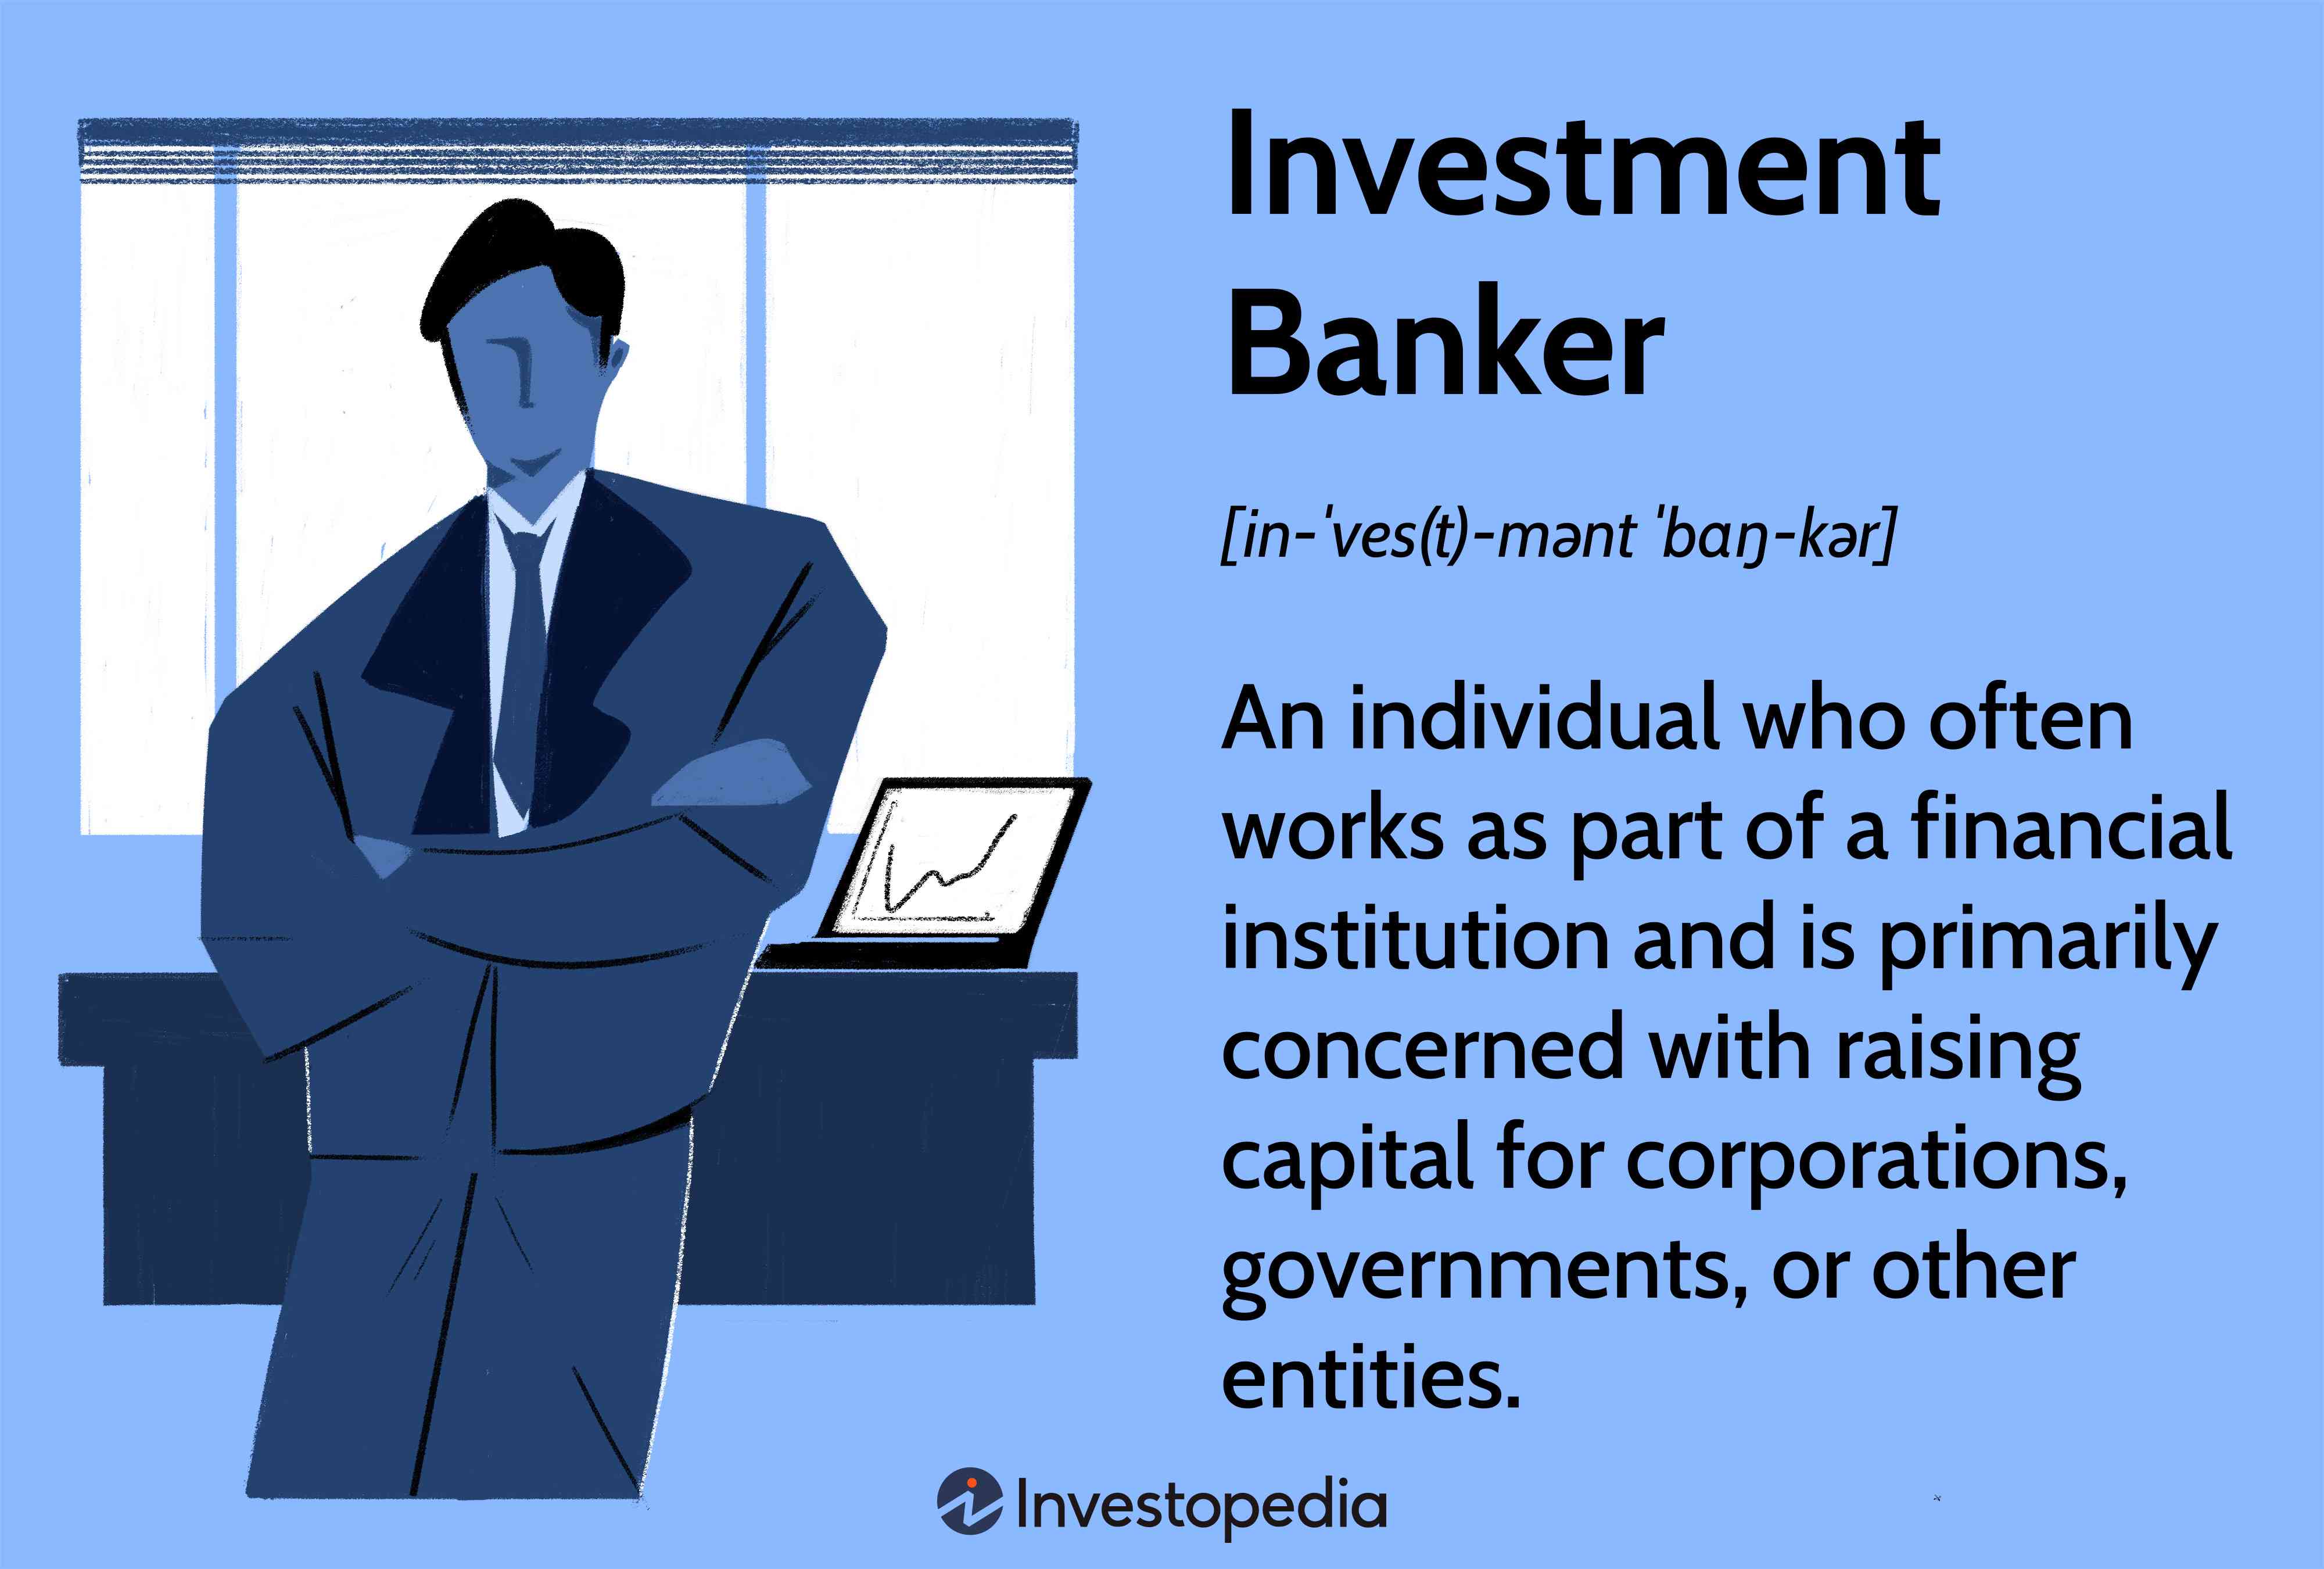 Investment Banker: An individual who often works as part of a financial institution and is primarily concerned with raising capital for corporations, governments, or other entities.